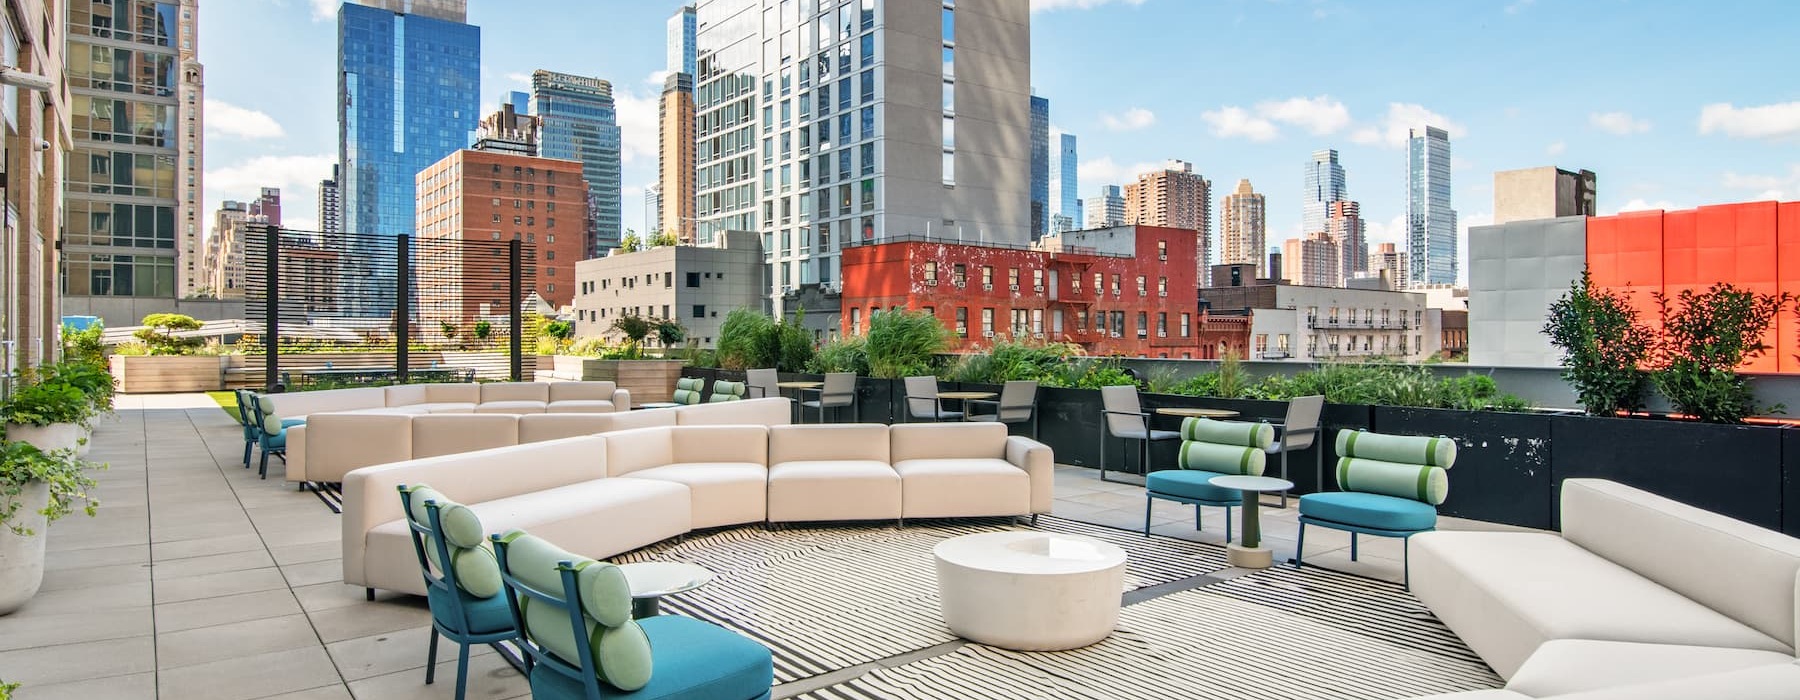 sky deck view with seating and modern-fitting landscaping accents